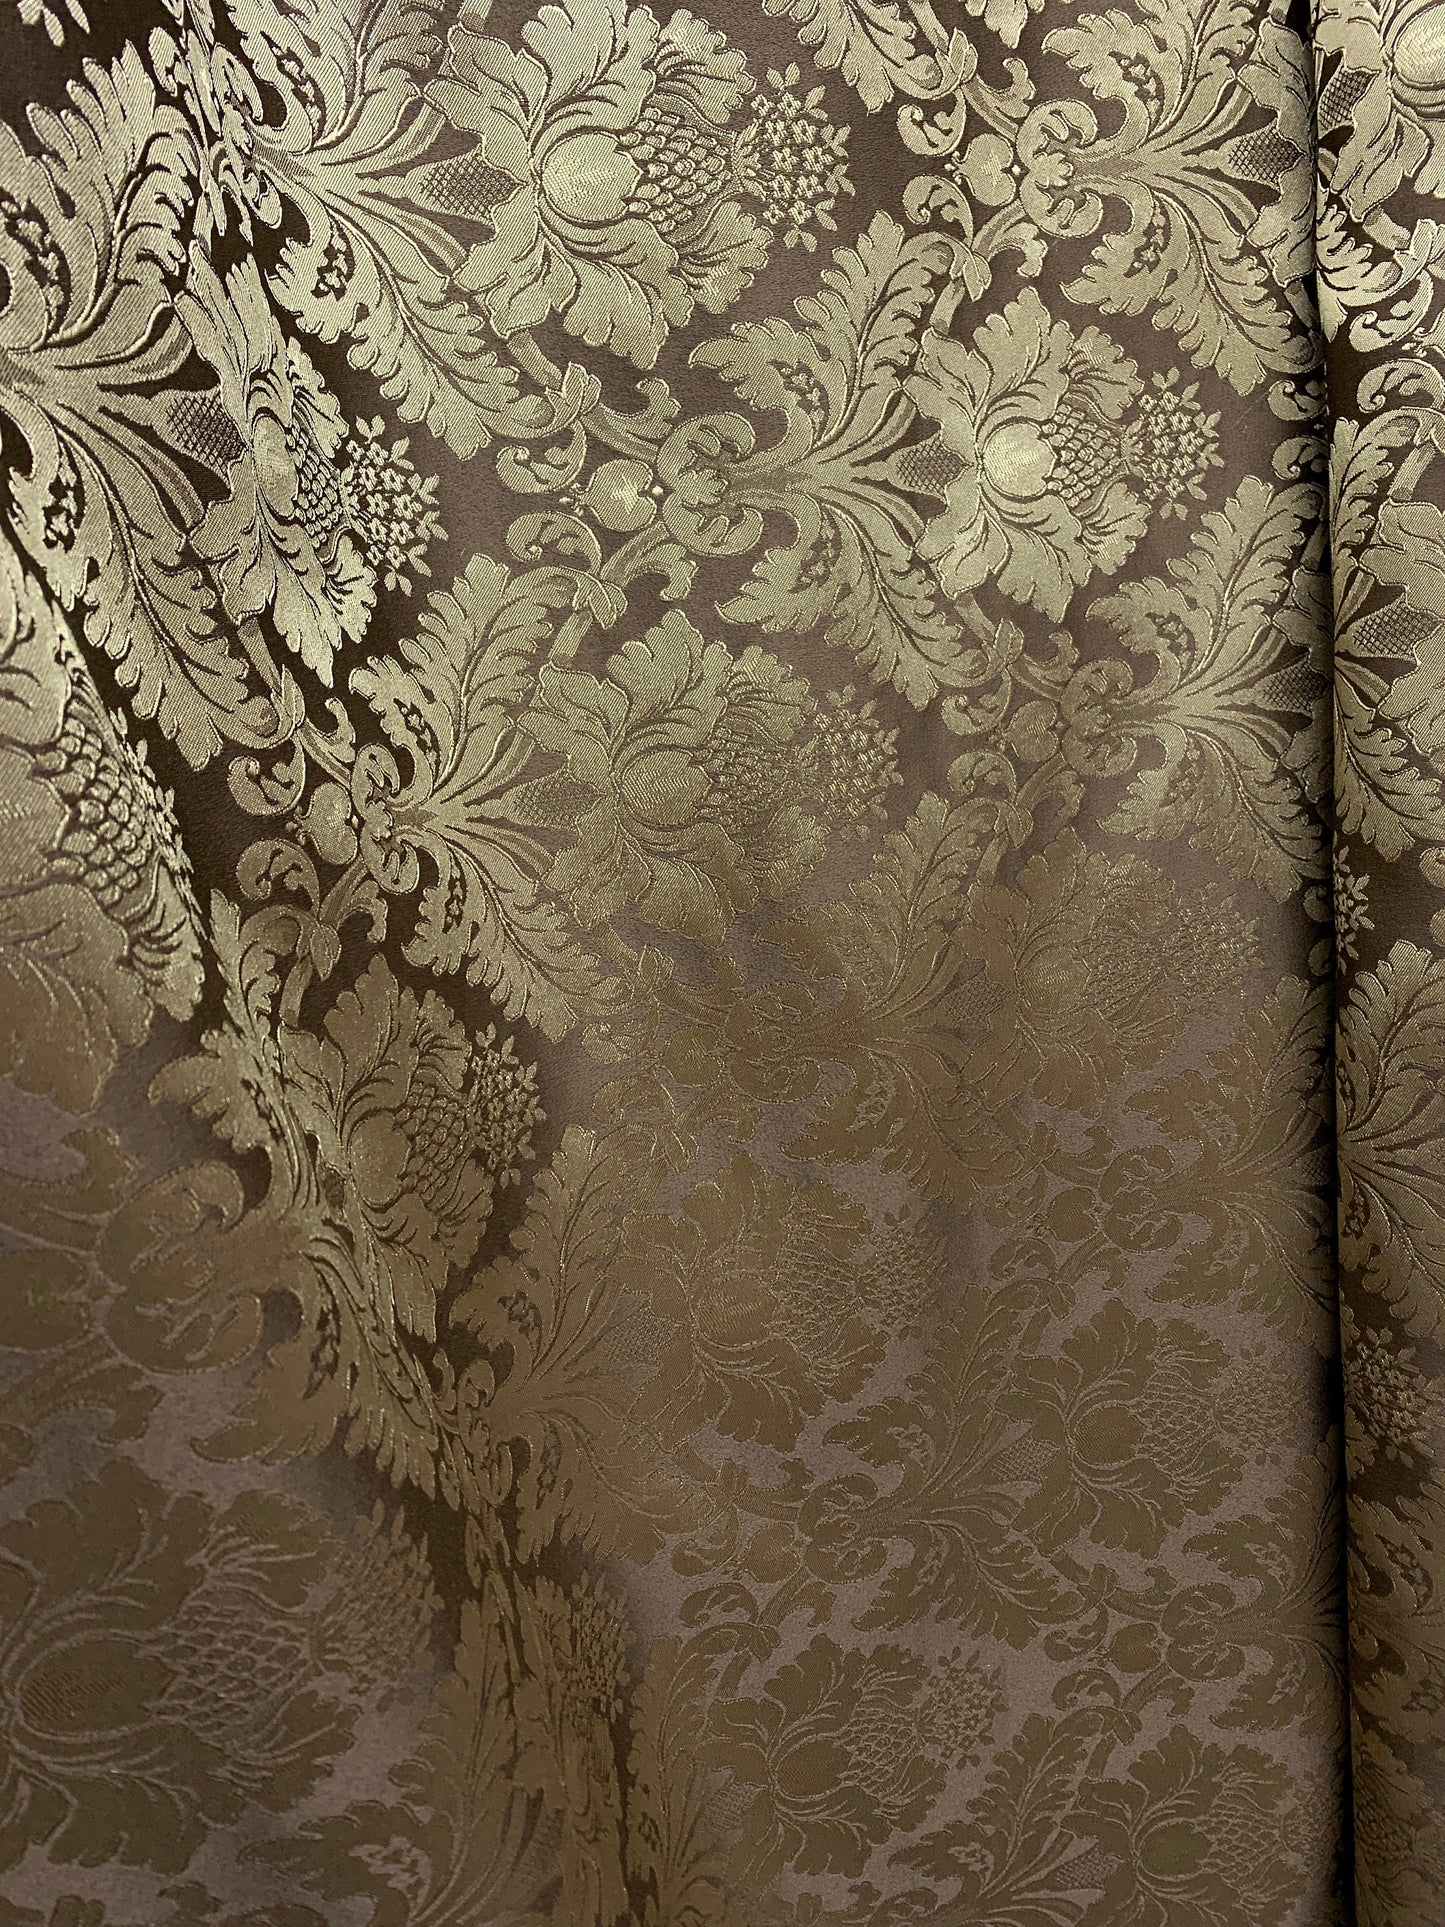 BROWN GOLD Damask Jacquard Brocade Flower Floral Fabric (110 in.) Sold By The Yard